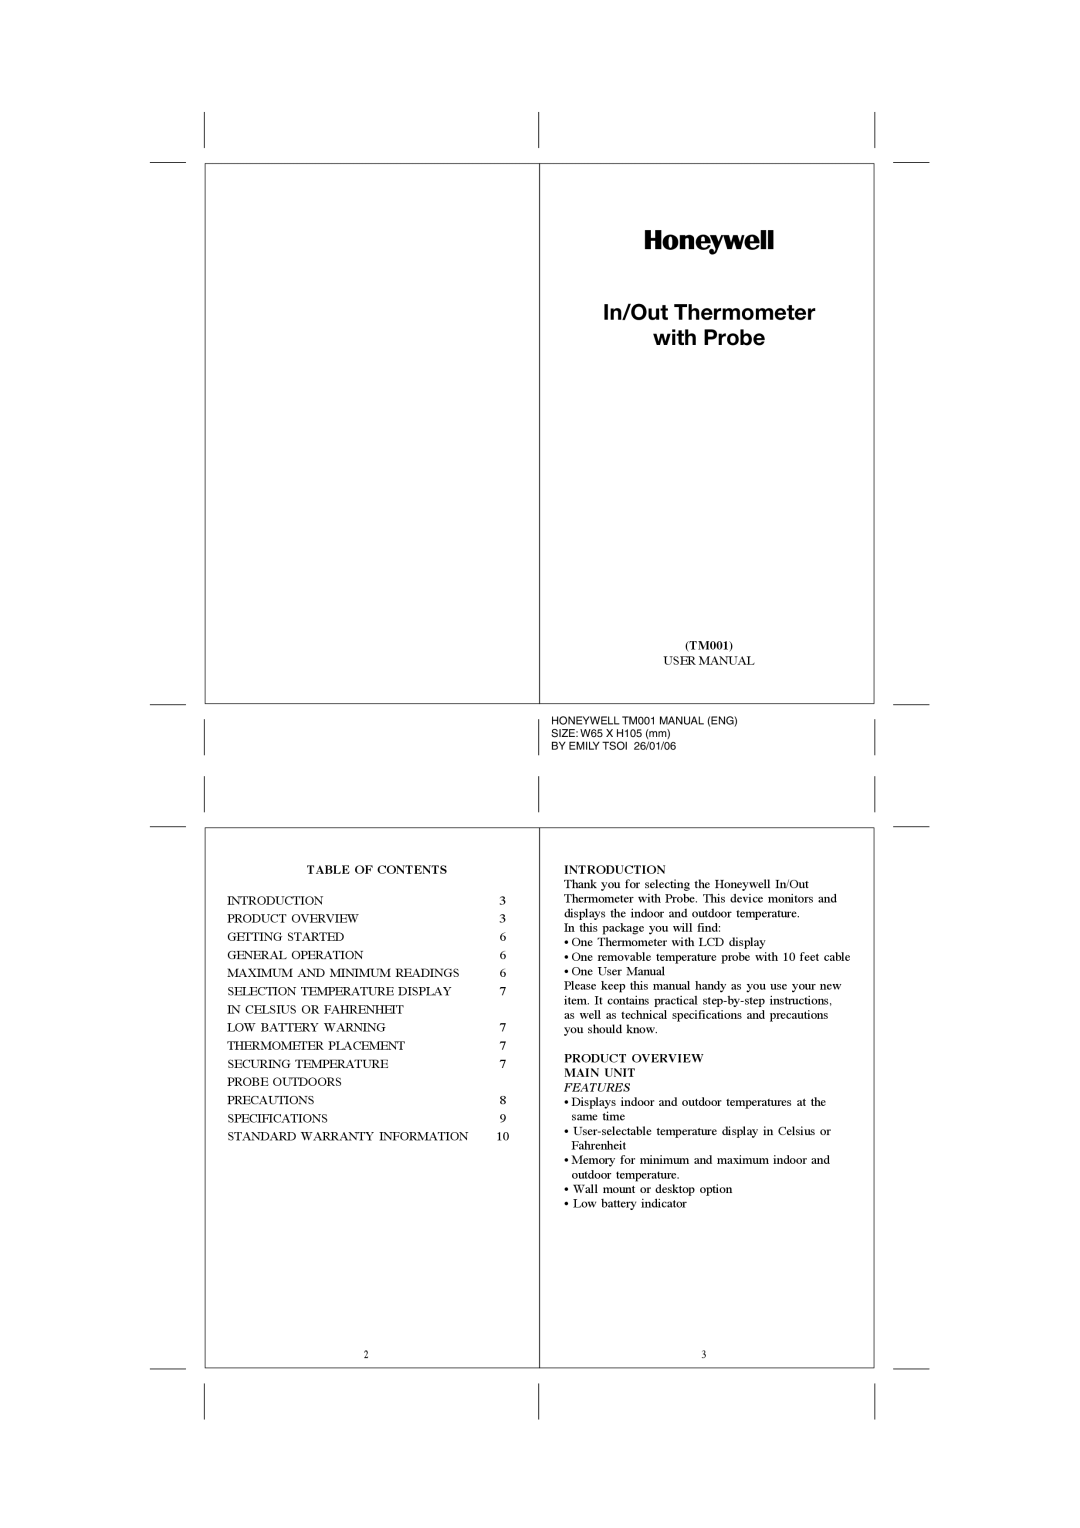 Honeywell TM001 user manual Features, In/Out Thermometer with Probe, Table Of Contents, Introduction 